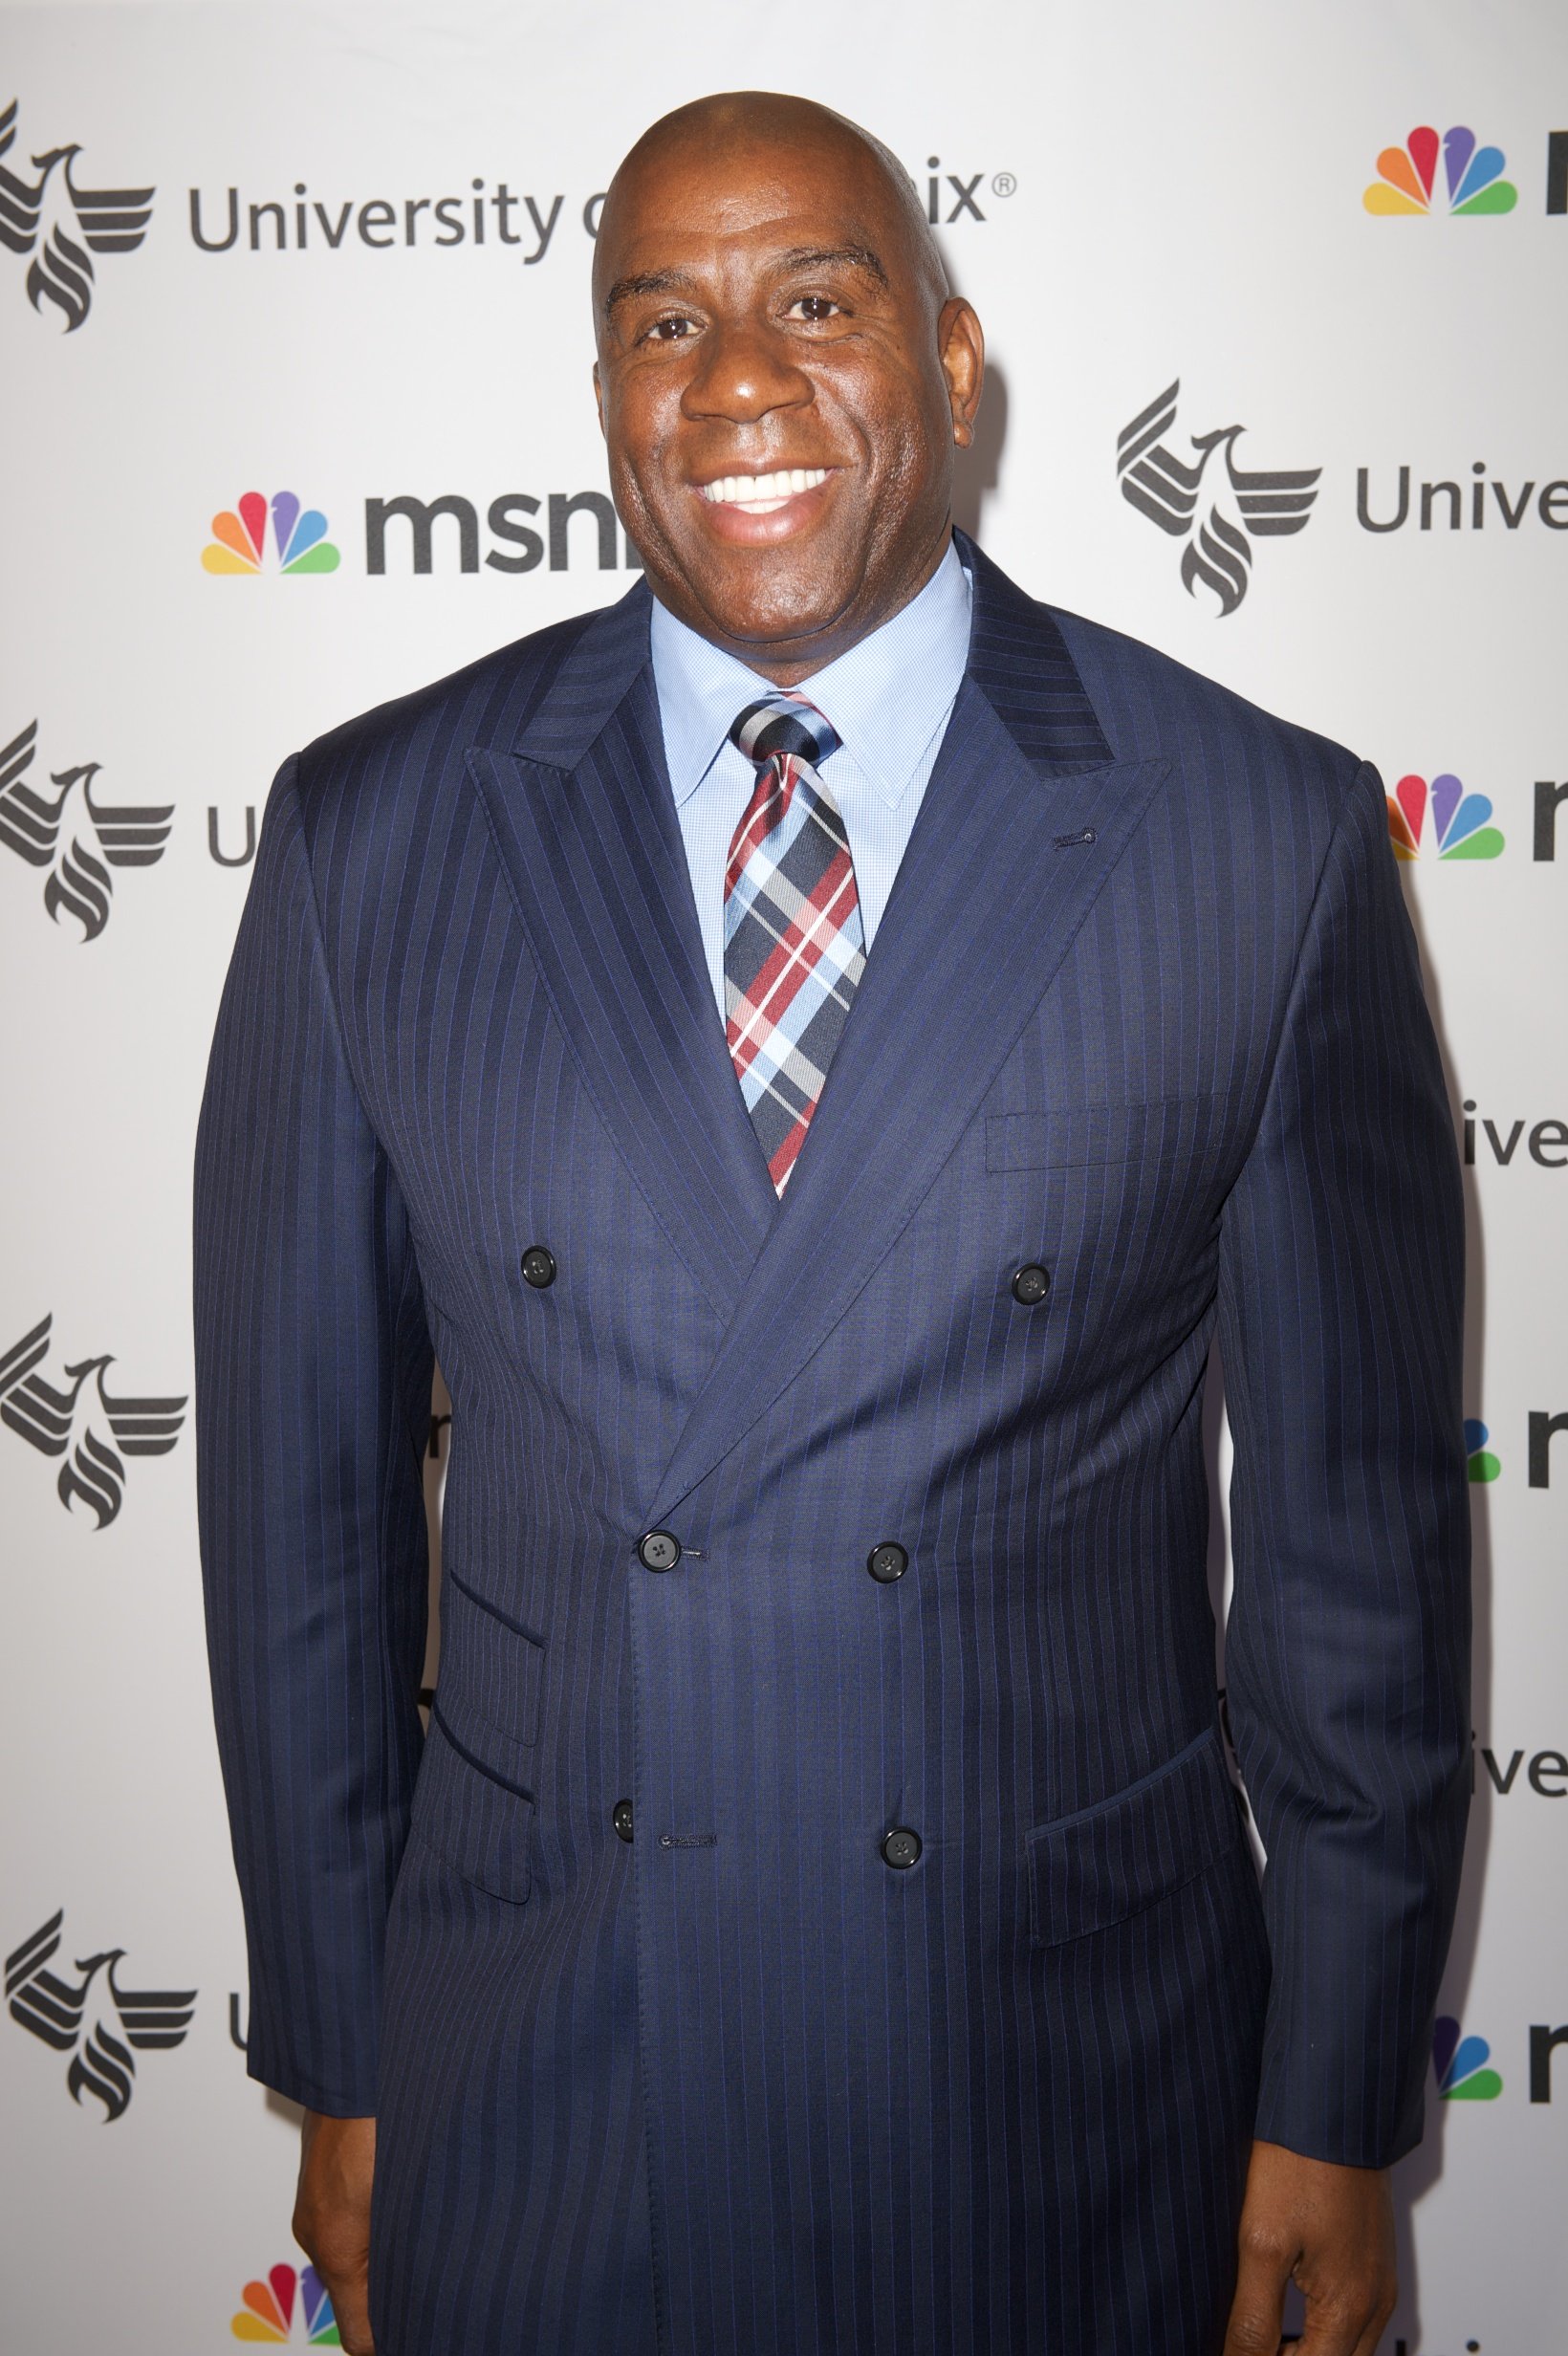 Magic Johnson attends the "Advancing The Dream" Live at The Apollo Theater on Sep. 6, 2013 in New York City | Photo: Getty Images